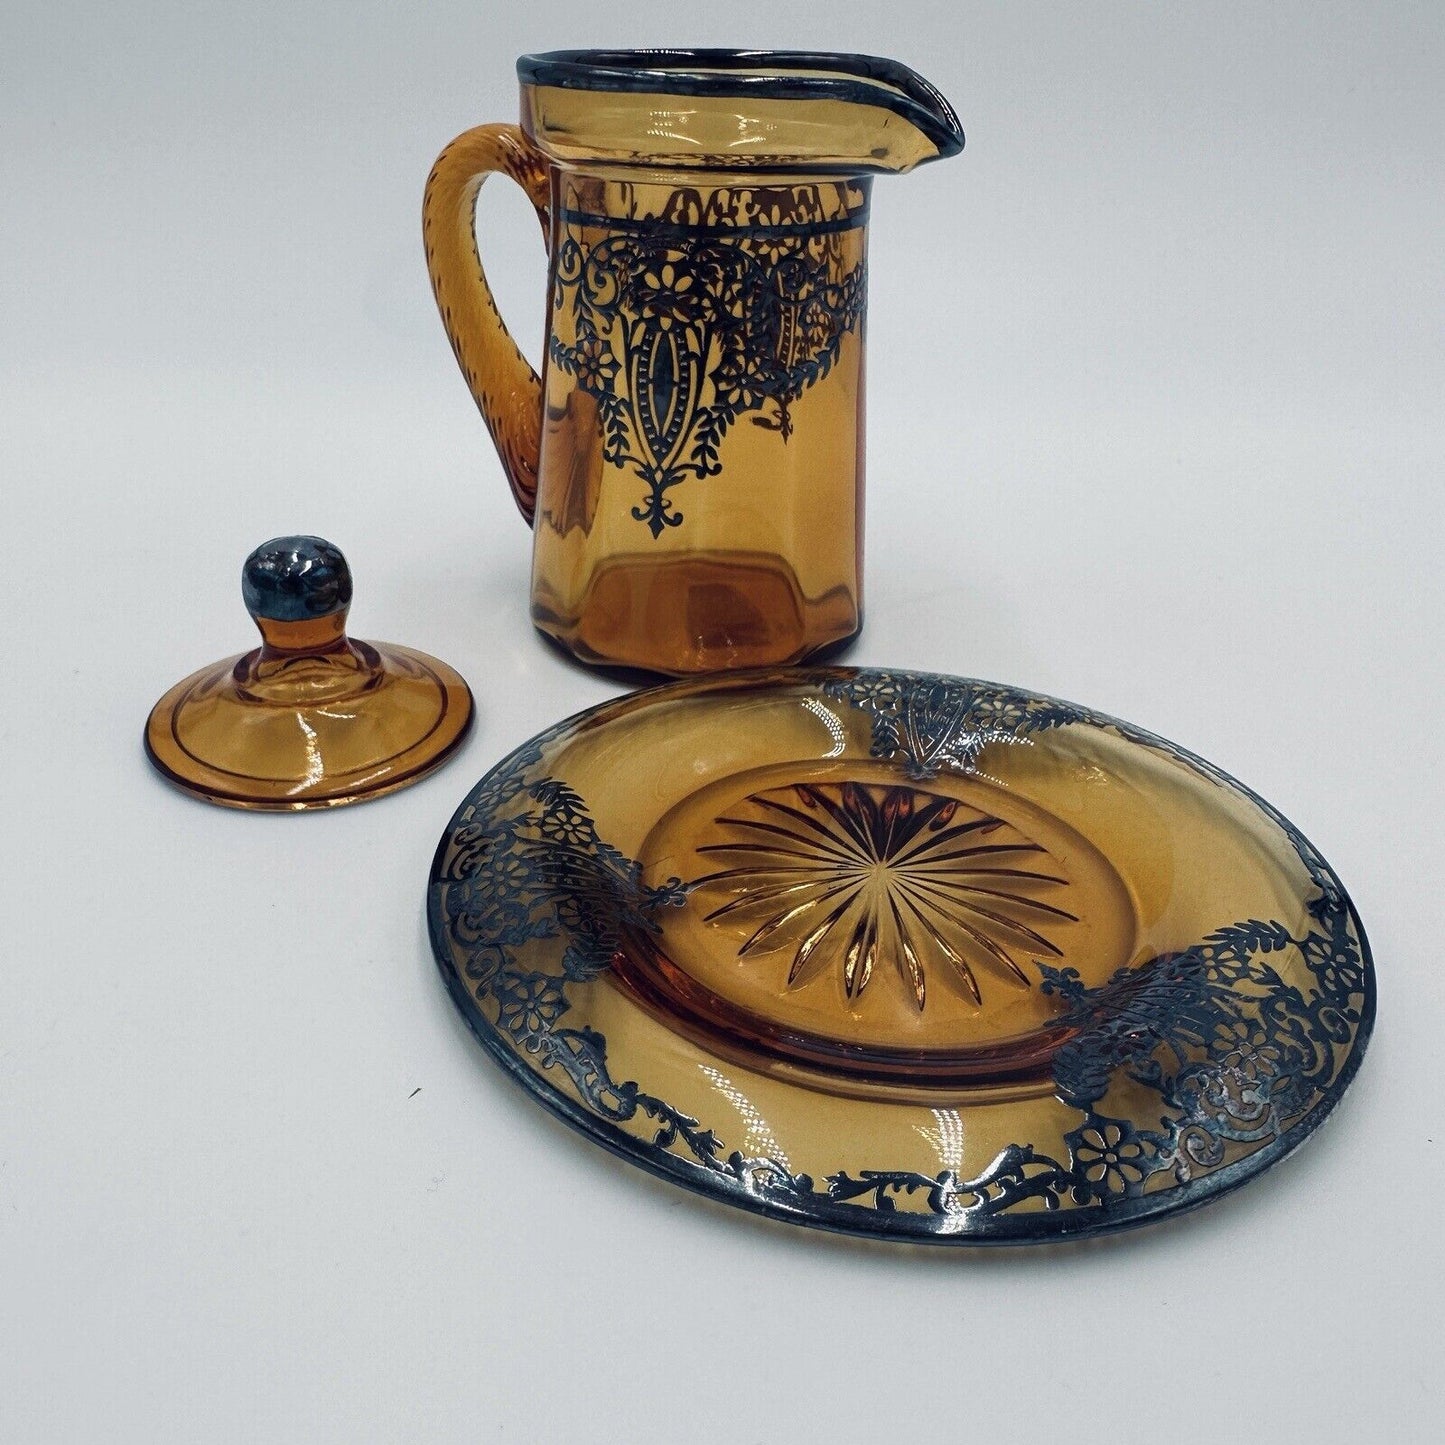 Amber Glass Lidded Pitcher and Saucer  with Sterling Silver Overlay Serveware